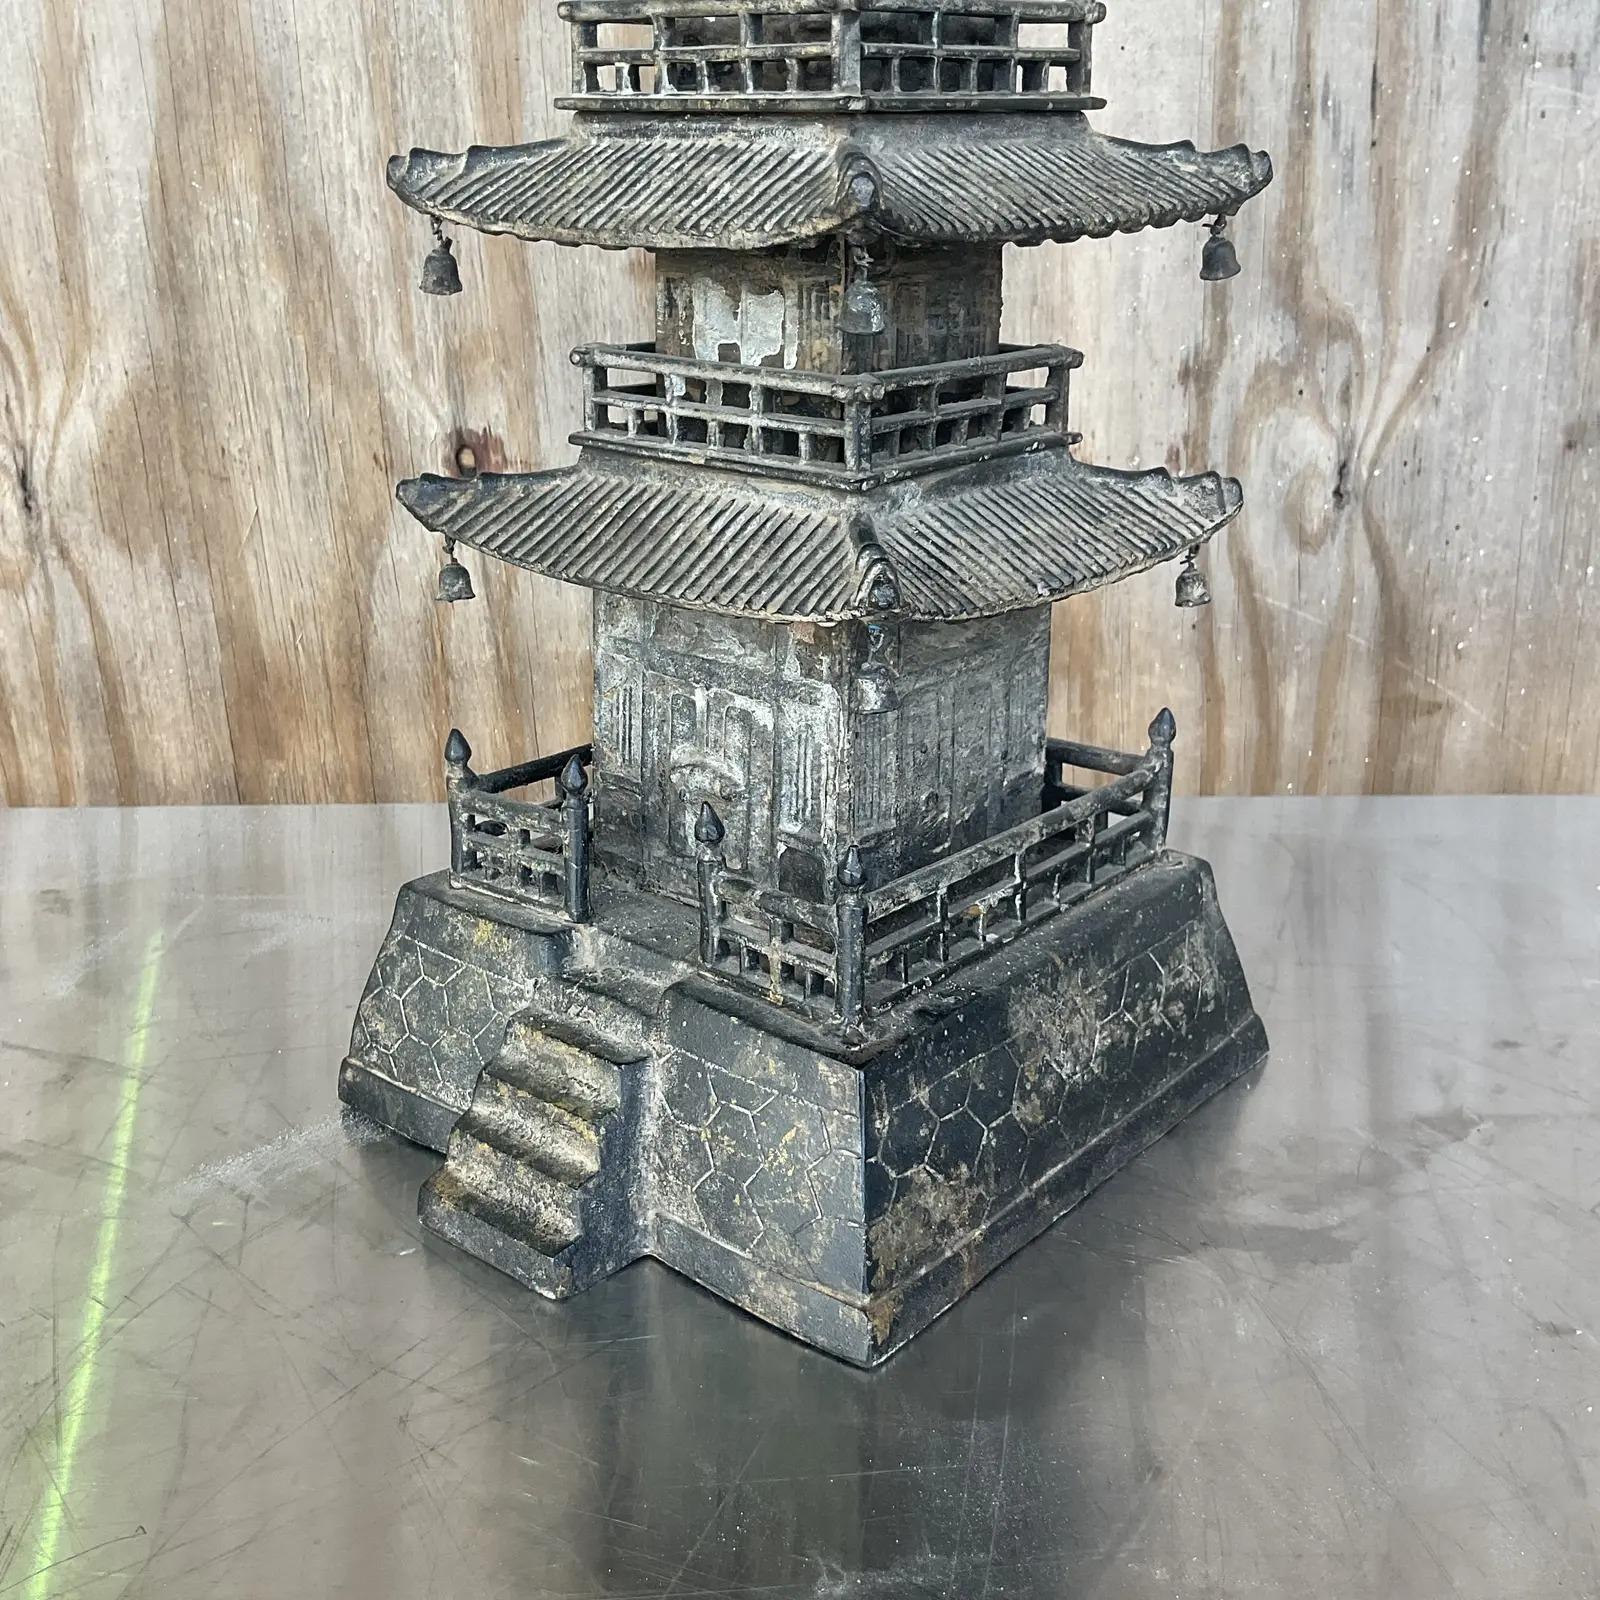 Incredible vintage Asian wrought iron pagoda. Beautiful elegant design with a mottled distressed finish. Little bells at the end of each roof leak. Acquired from a Palm Beach estate.